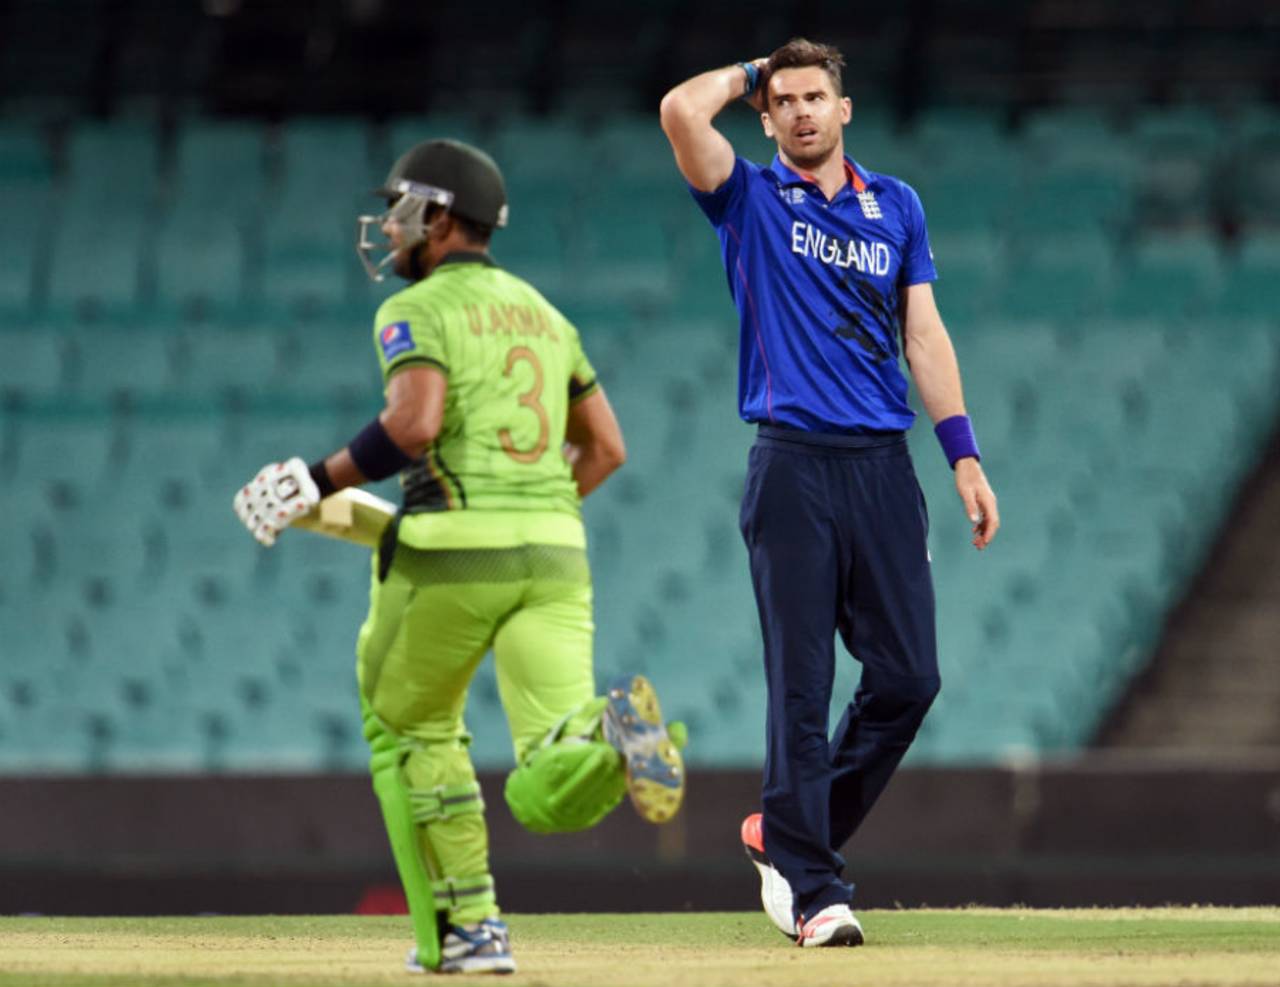 A disappointed James Anderson looks on as Umar Akmal takes a run, England v Pakistan, World Cup warm-up, Sydney, February 11, 2015